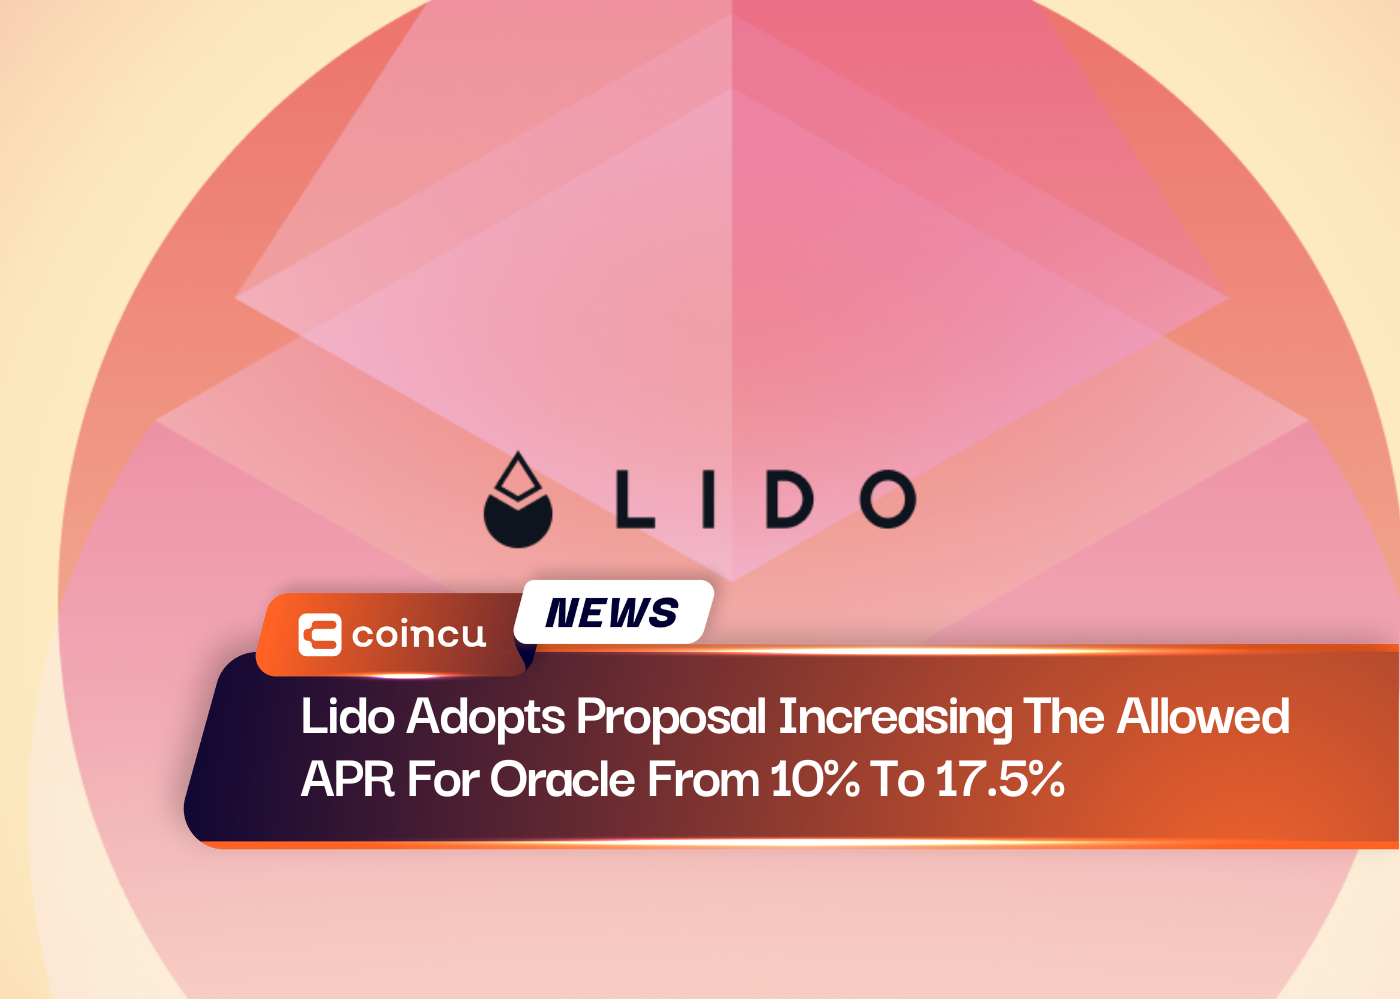 Lido Adopts Proposal Increasing The Allowed APR For Oracle From 10% To 17.5%